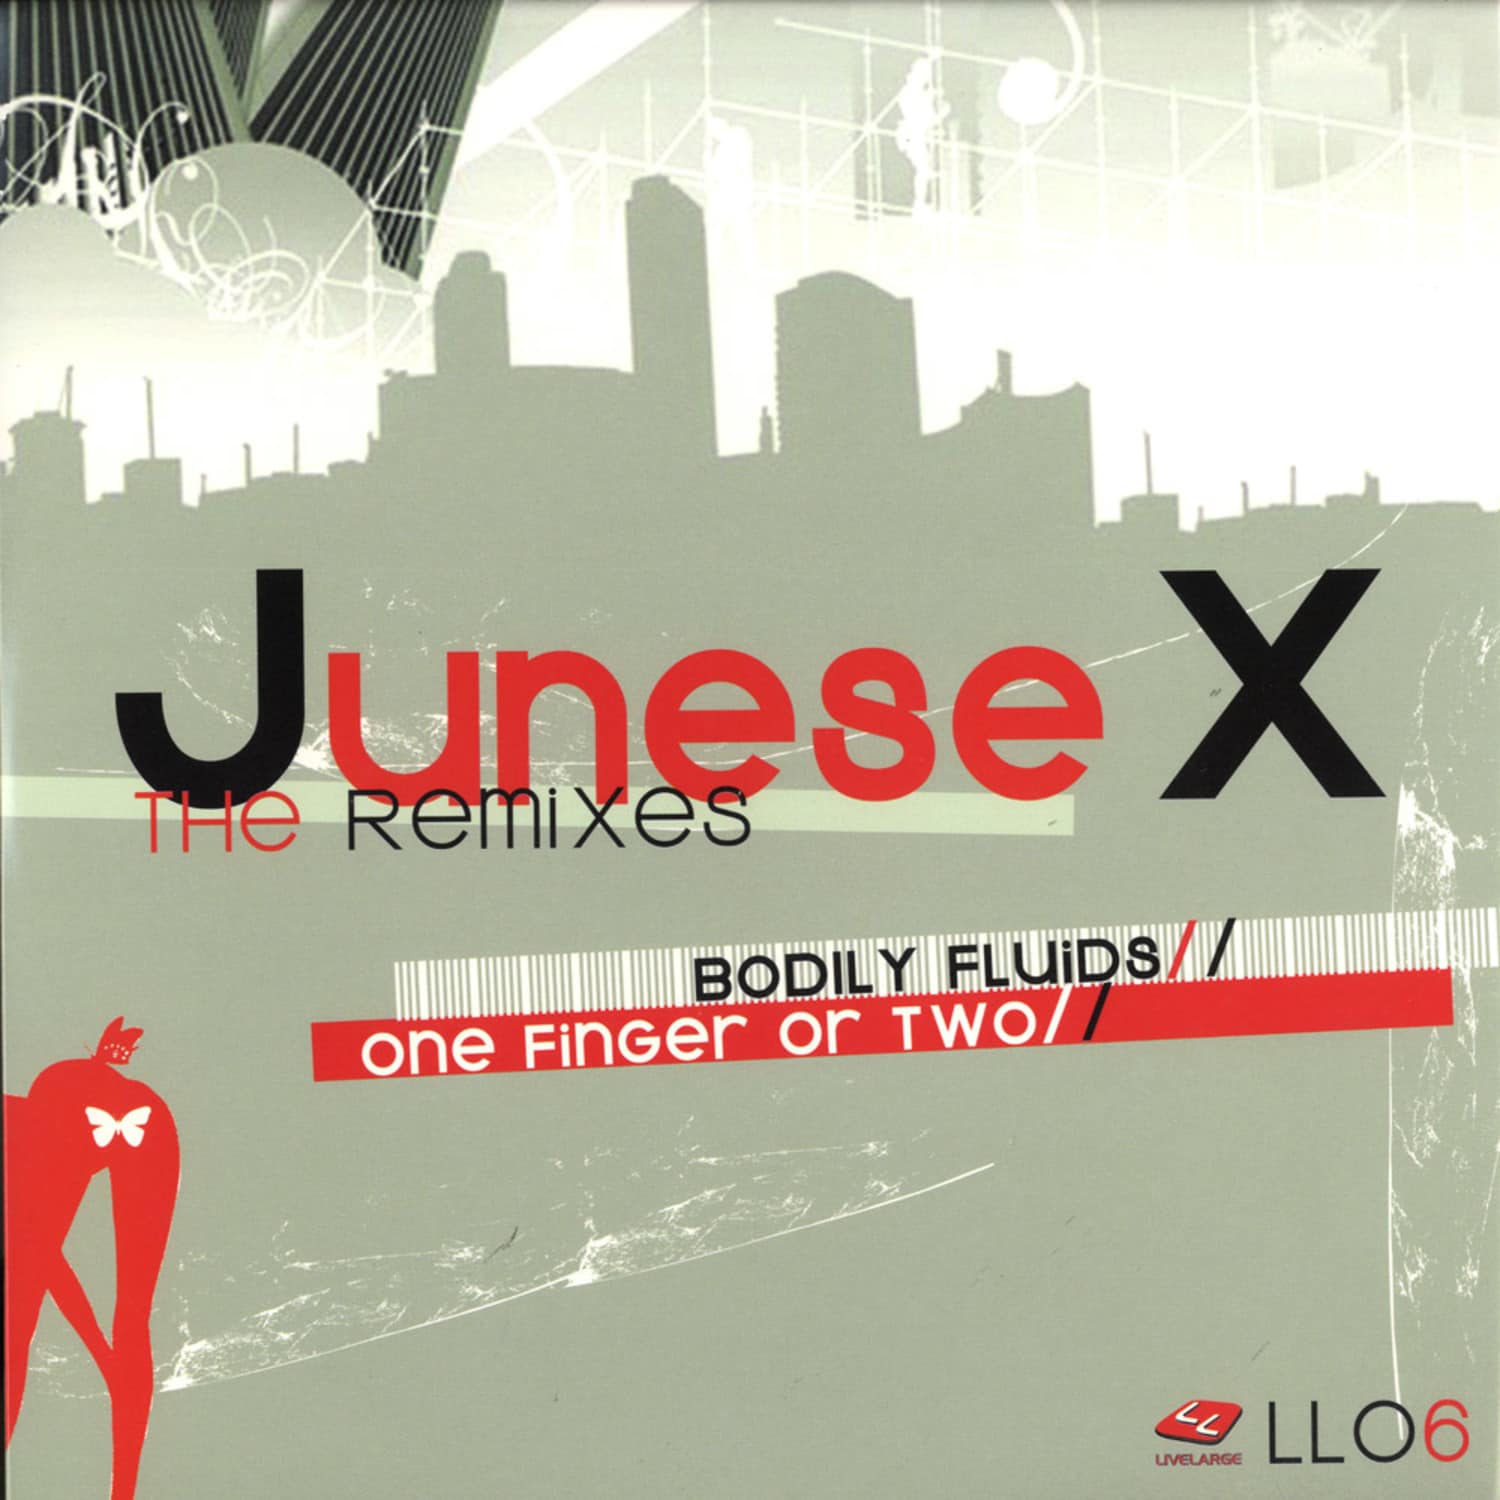 Junesex - BODILY / ONE FINGER OR TWO 